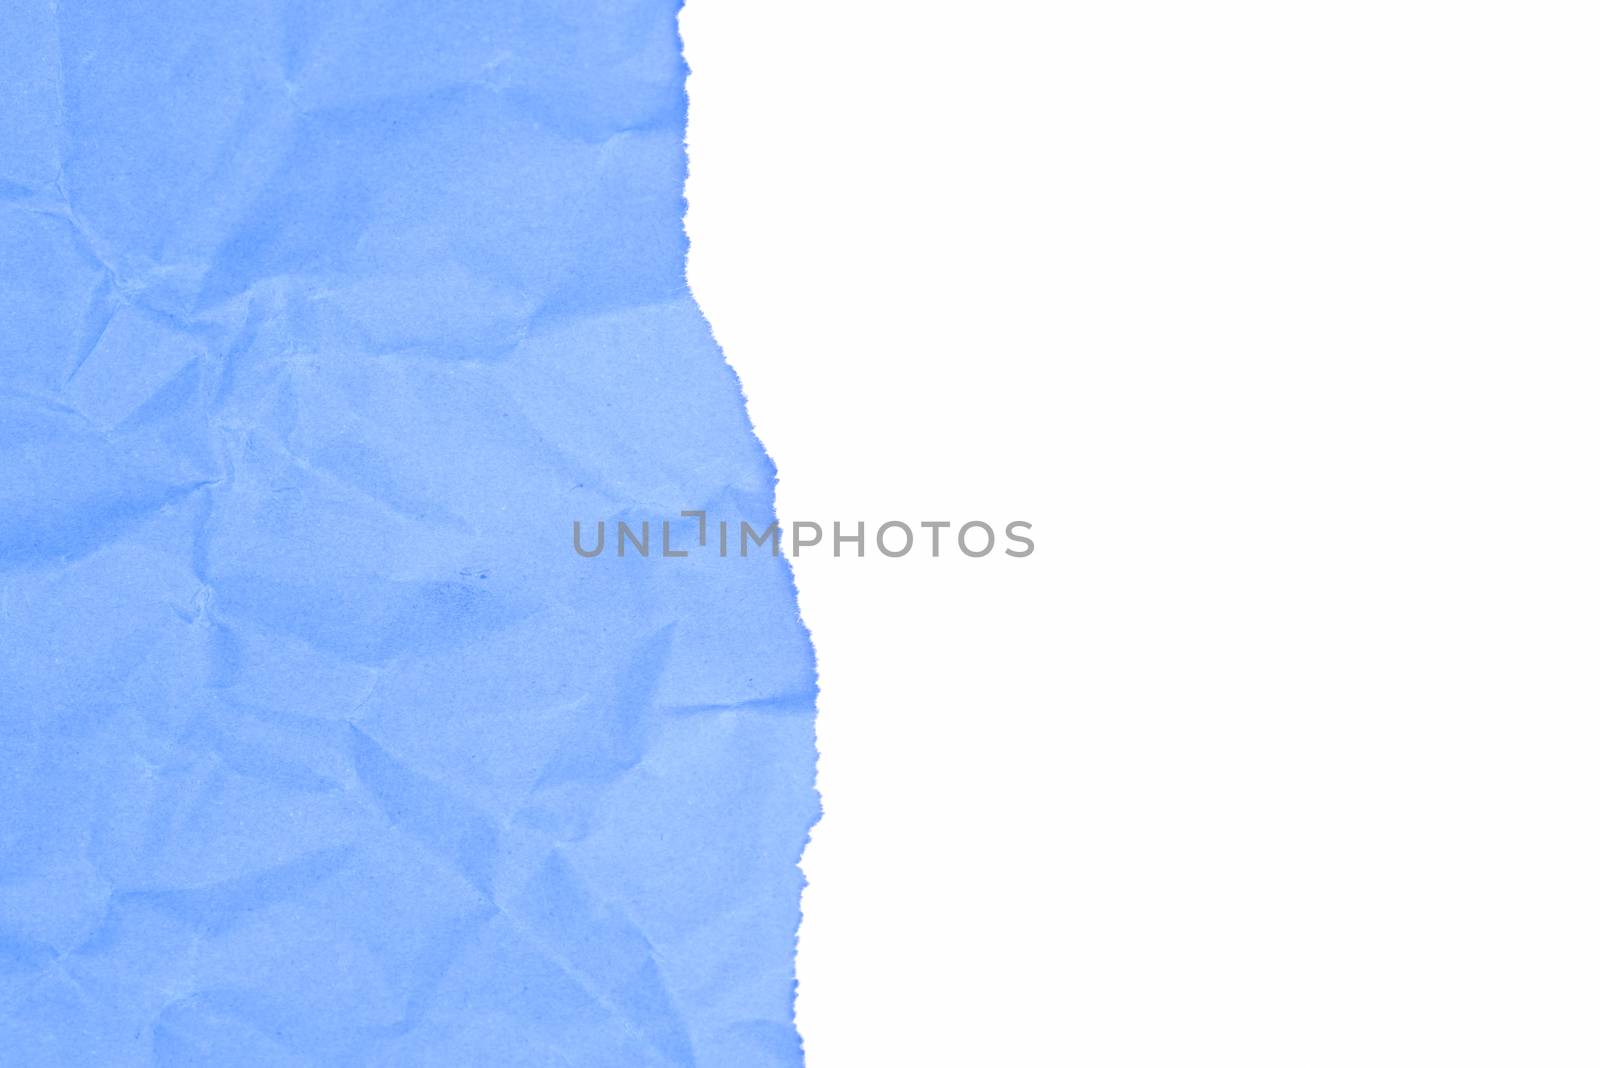 White ripped papper and blue crumpled background